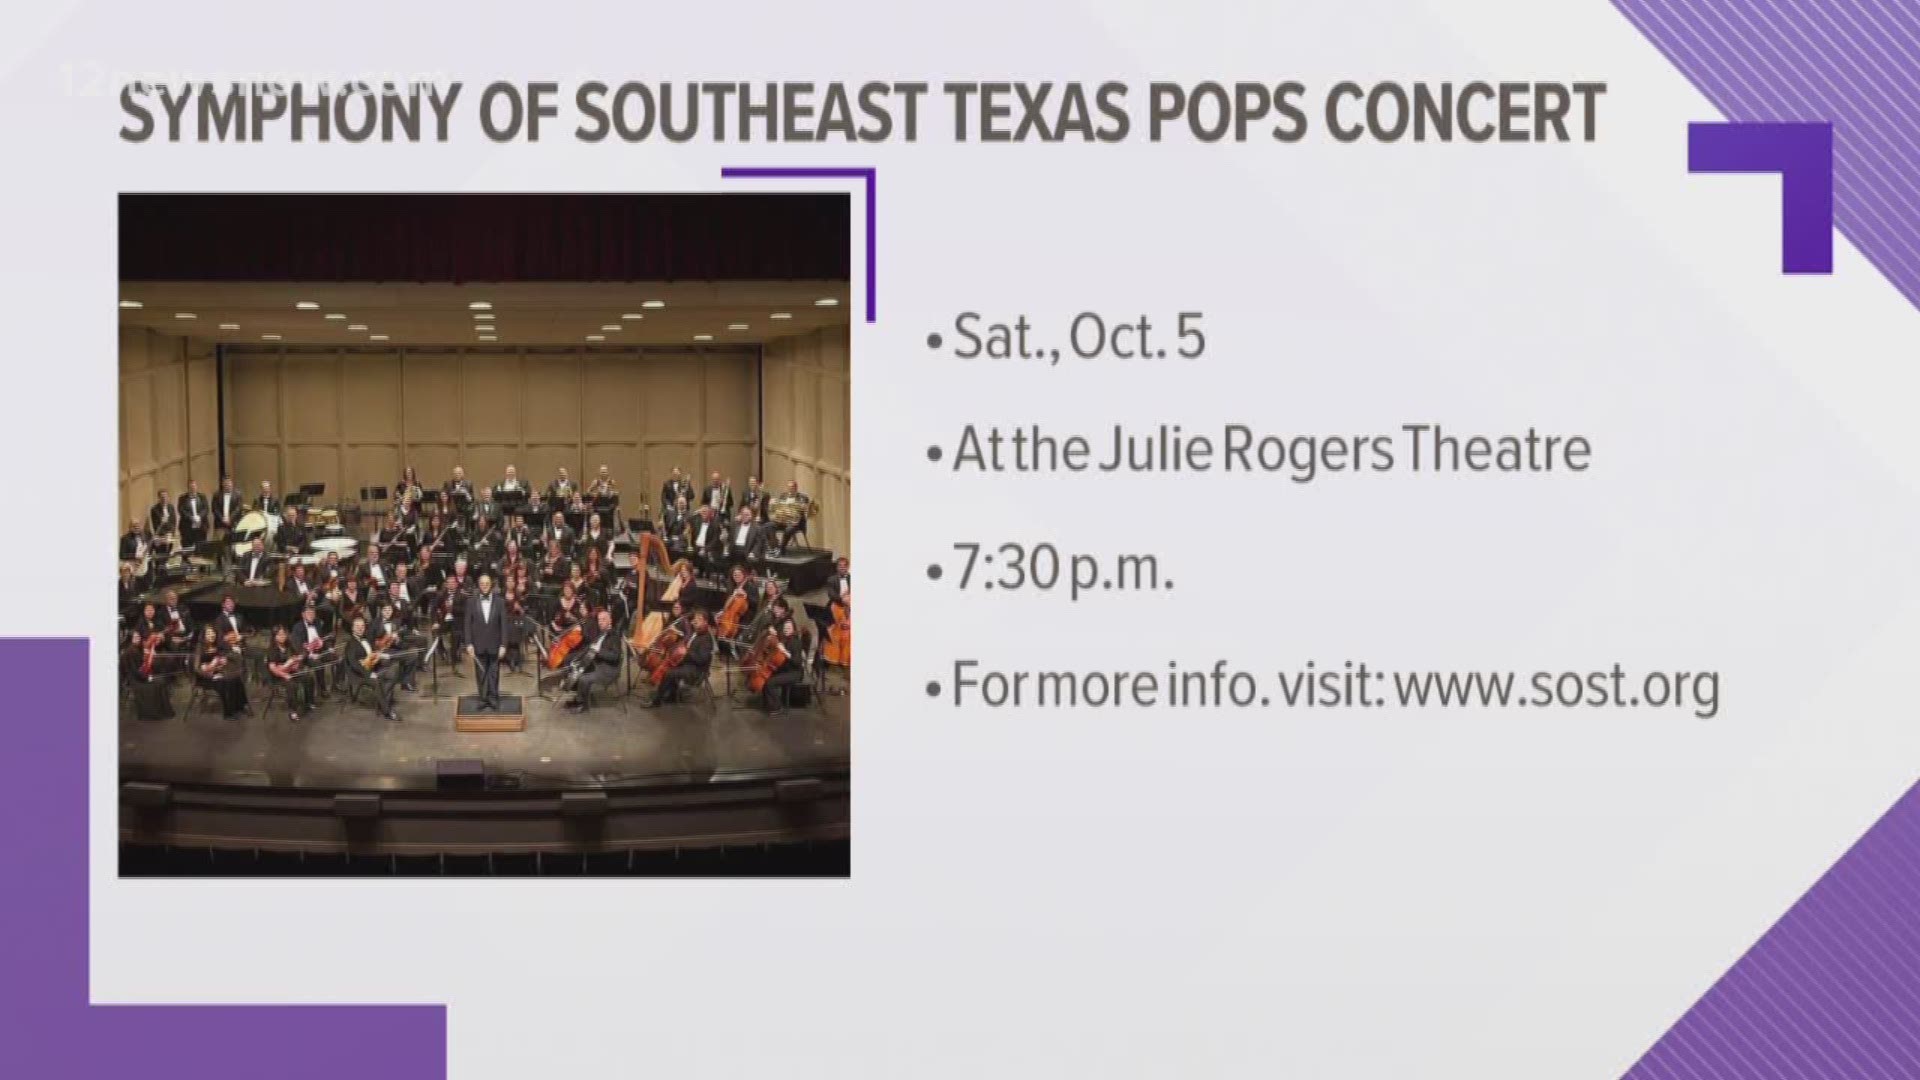 The concert is on October 5 at the Julie Rogers Theatre.